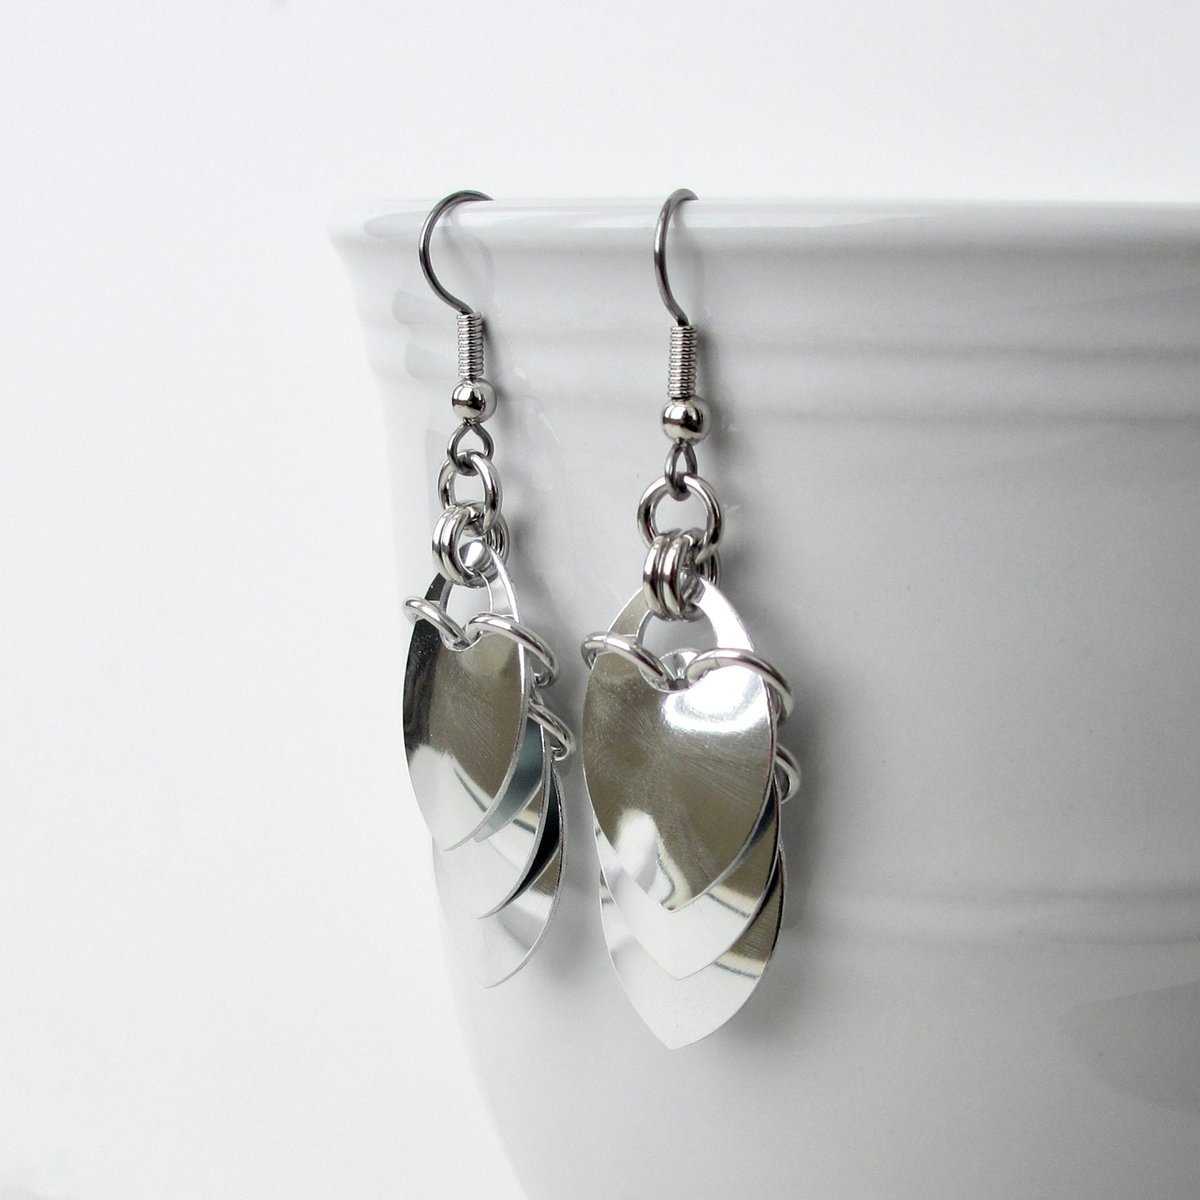 Silver aluminum chainmail scales earrings, shiny mirror finish, everyday wear lightweight non-tarnish jewelry